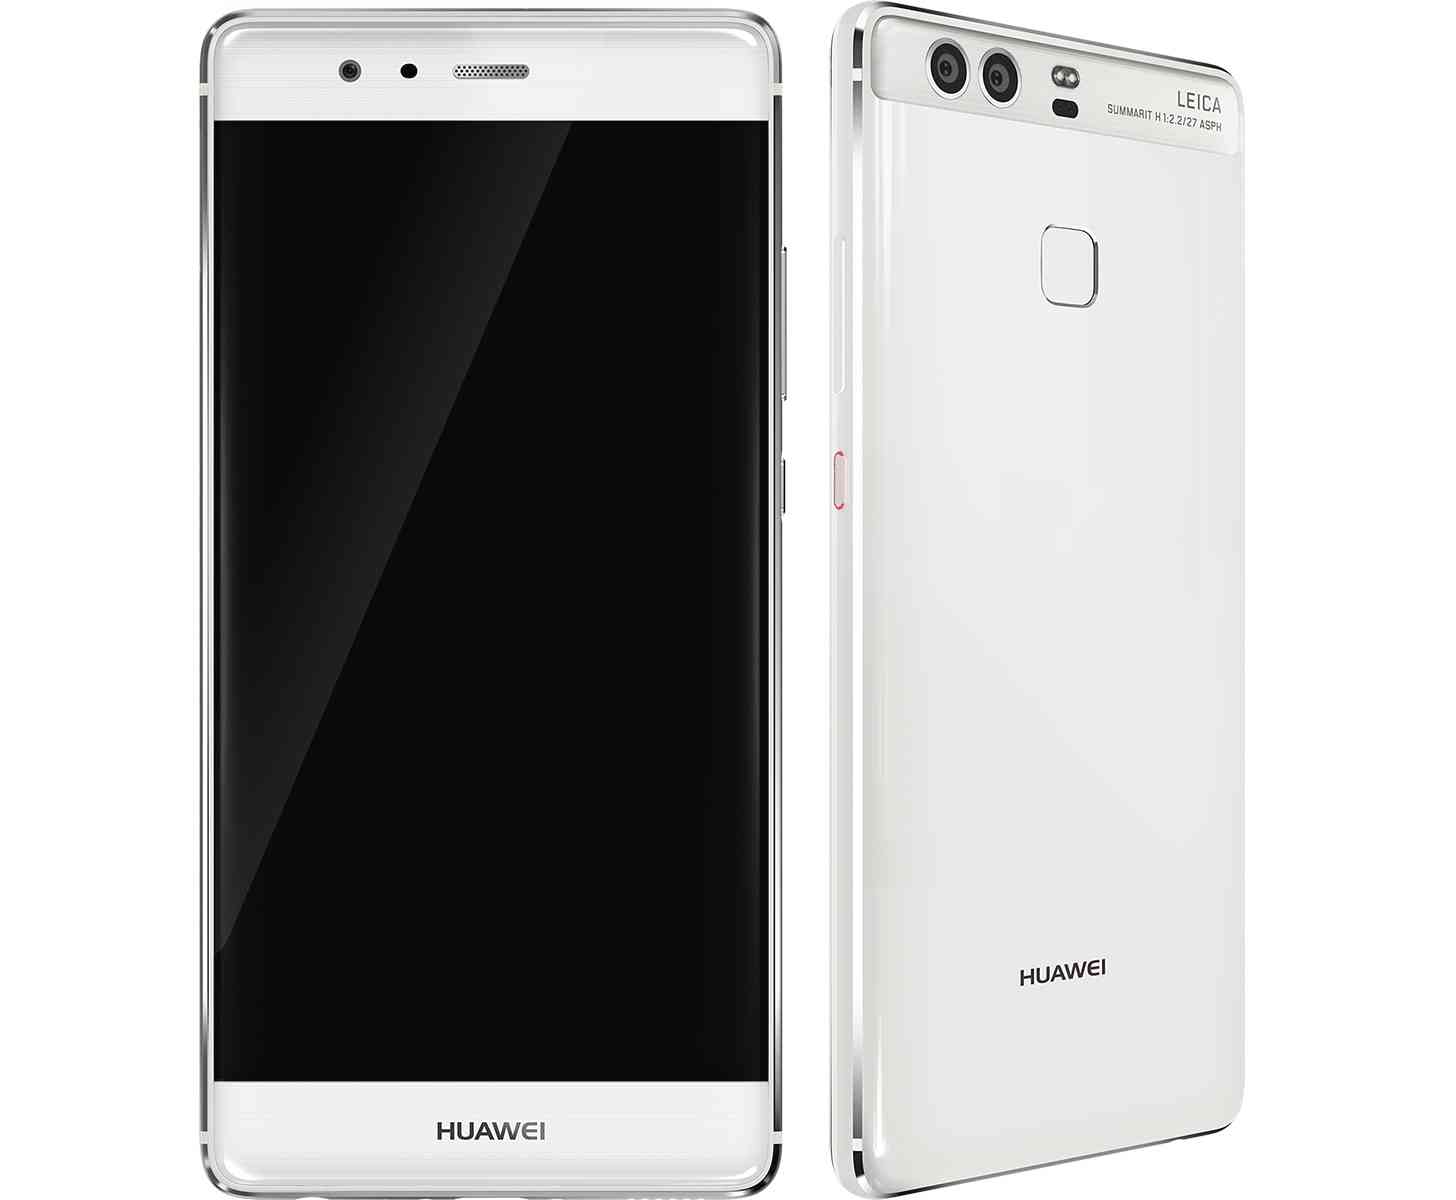 Huawei P9 official white large